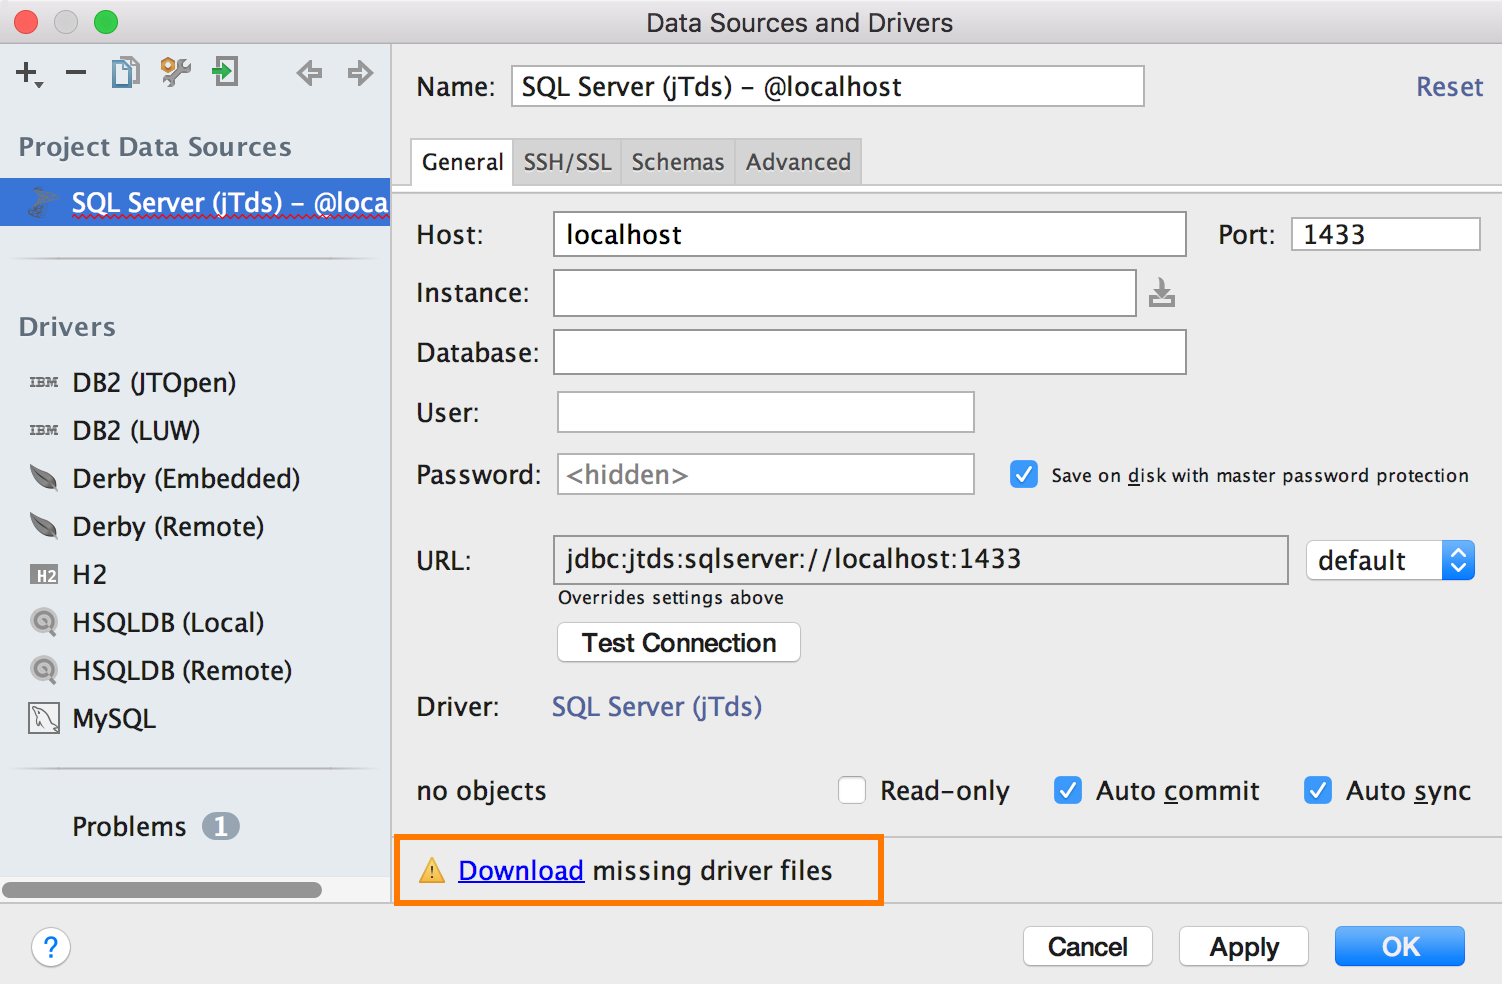 Click the Download missing drivers link